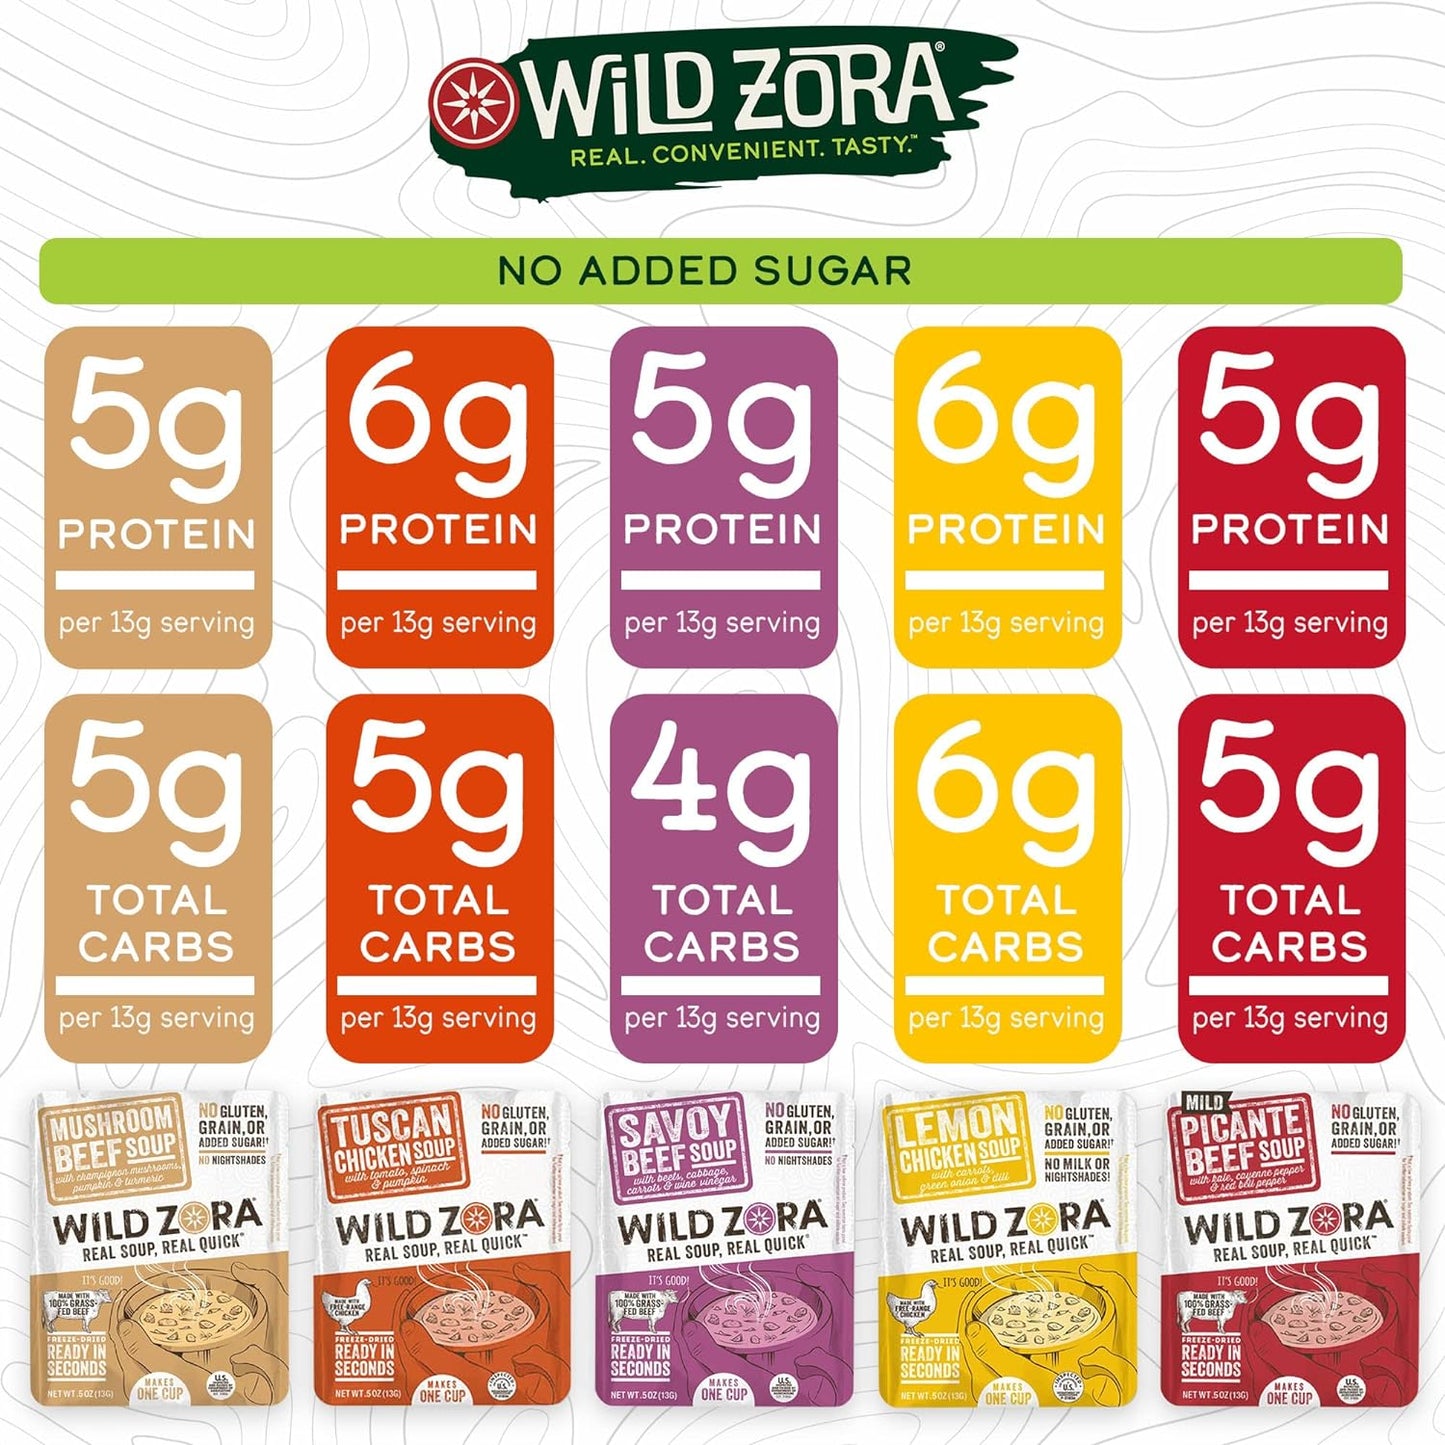 Wild Zora Instant Keto-Friendly Soups 5-Pack Variety, Broth Made with Grass-Fed Beef, Free-Range Chicken, and Vegetables, Gluten-Free, Low Carb, No Added Sugar, Flavorful Pantry Staples - 0.5oz/13g